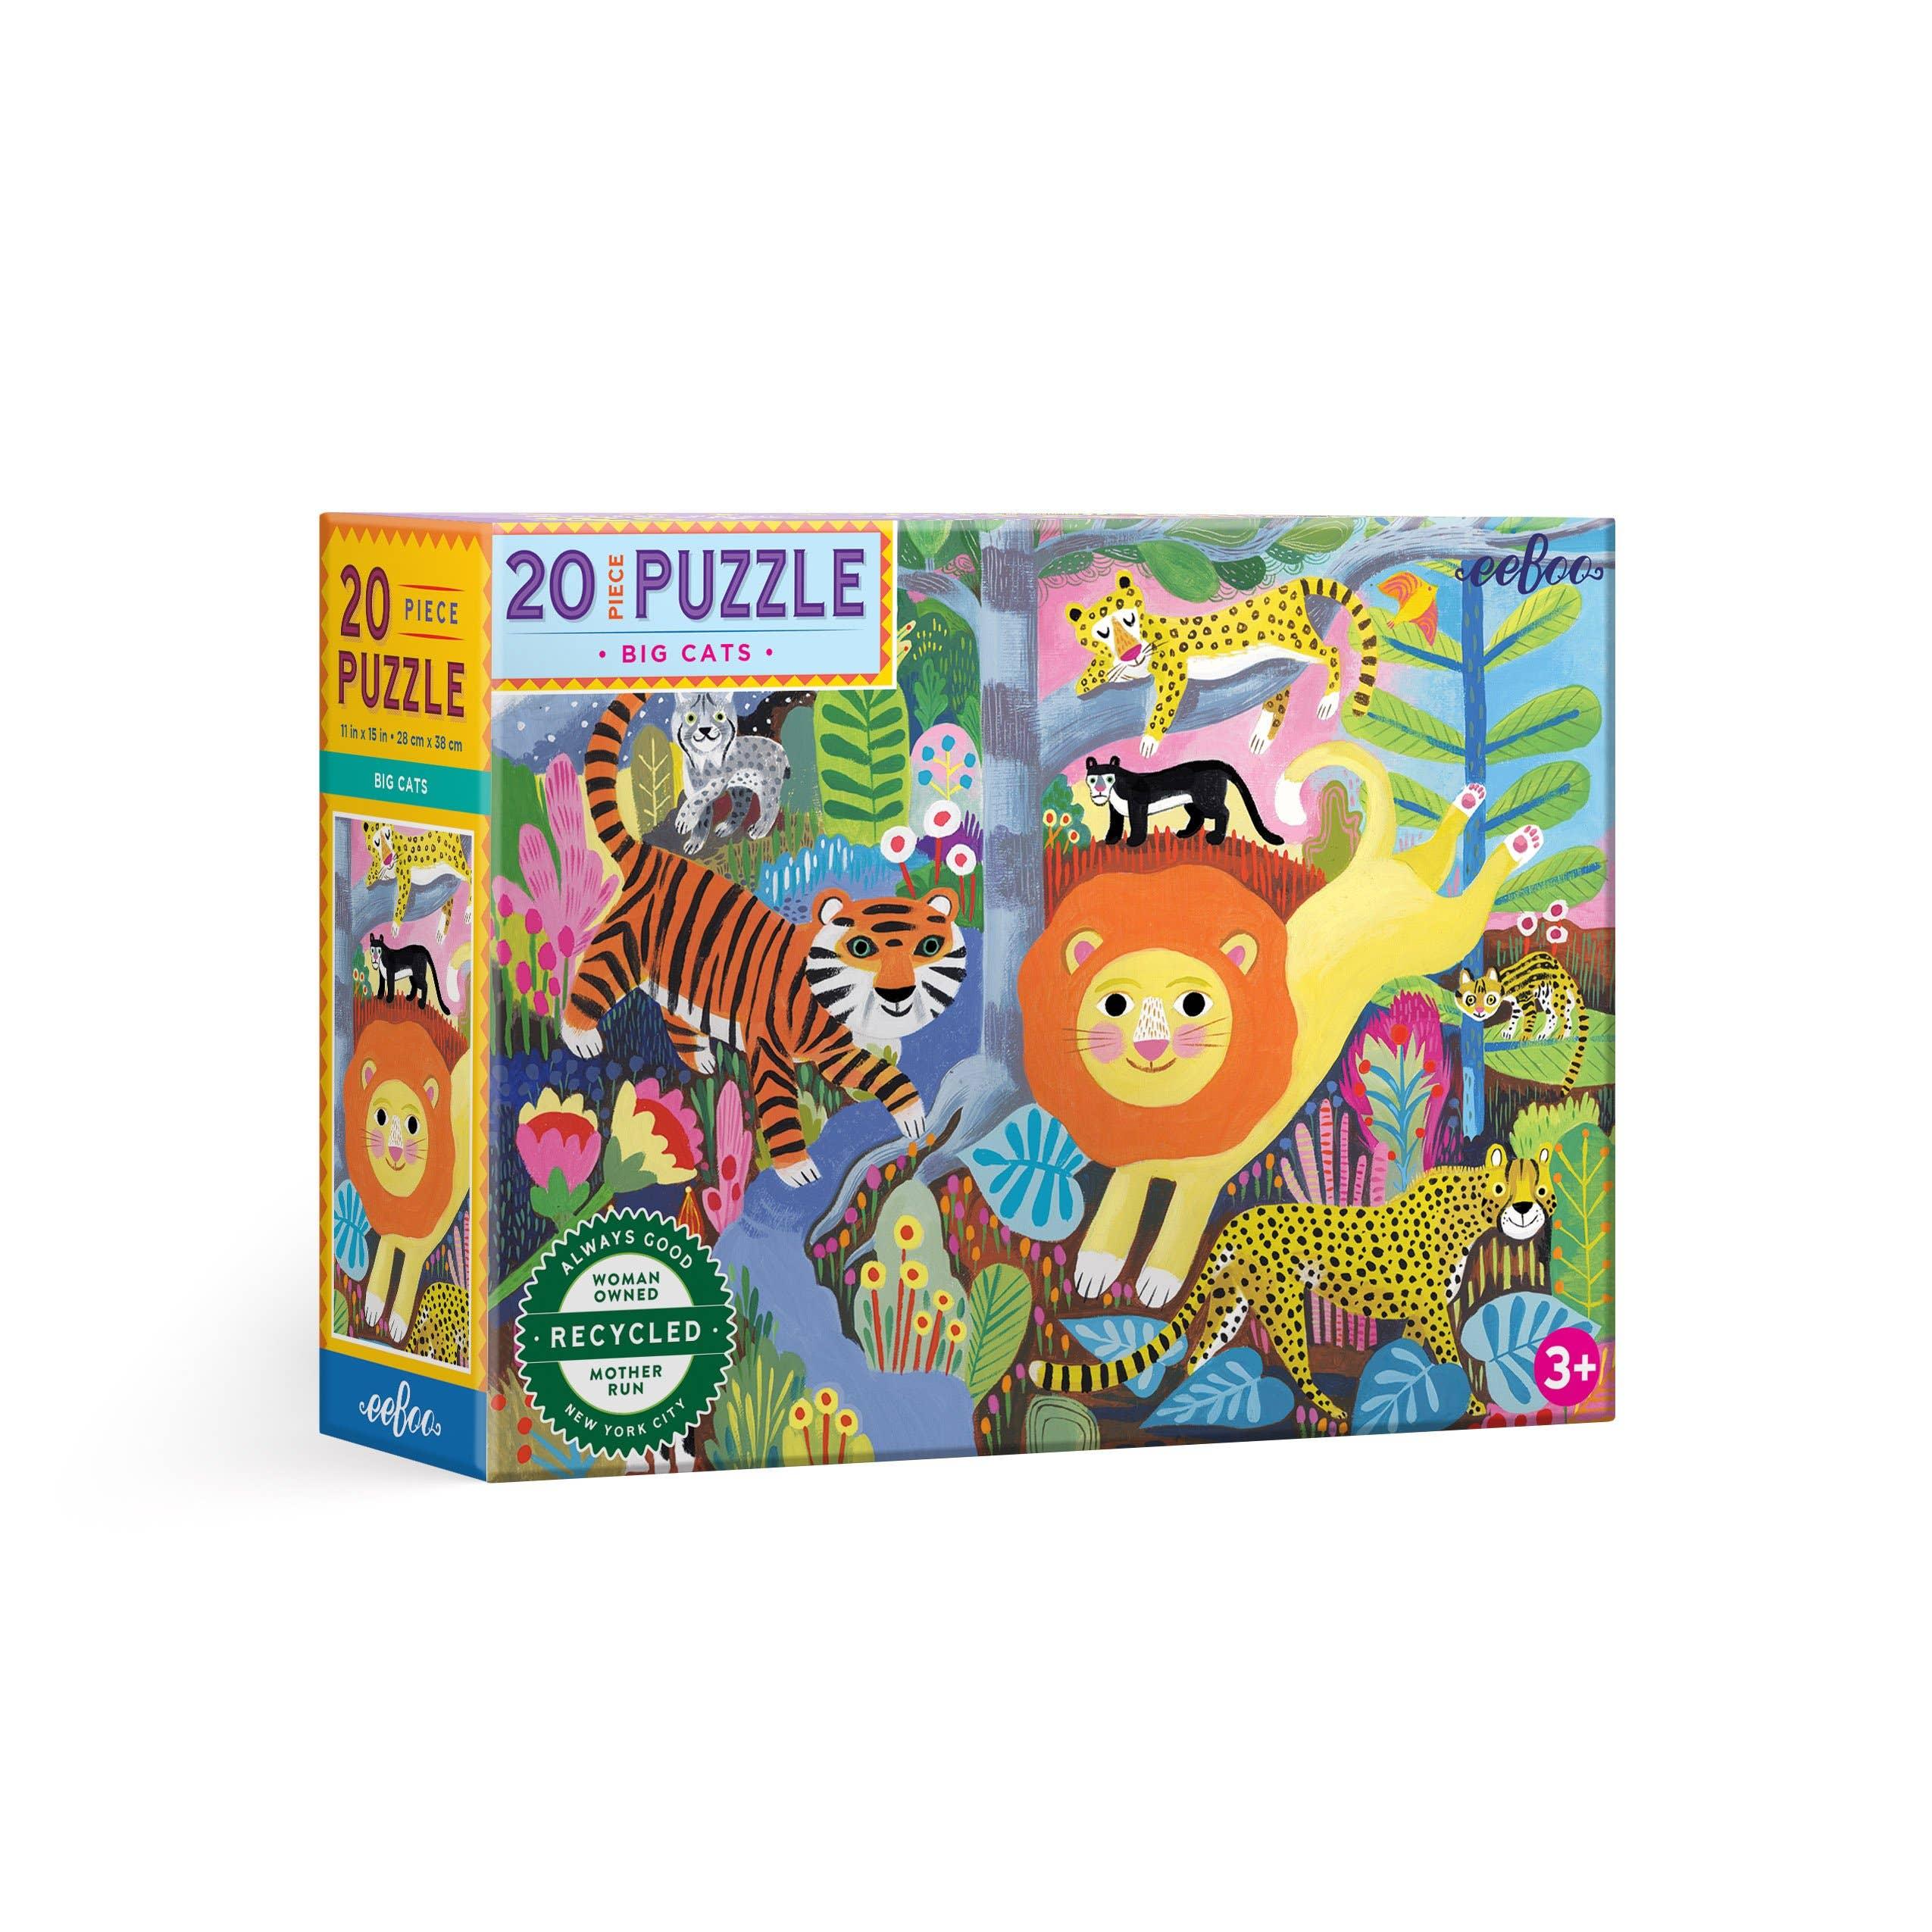 Big Cats 20 Piece Puzzle - Why and Whale